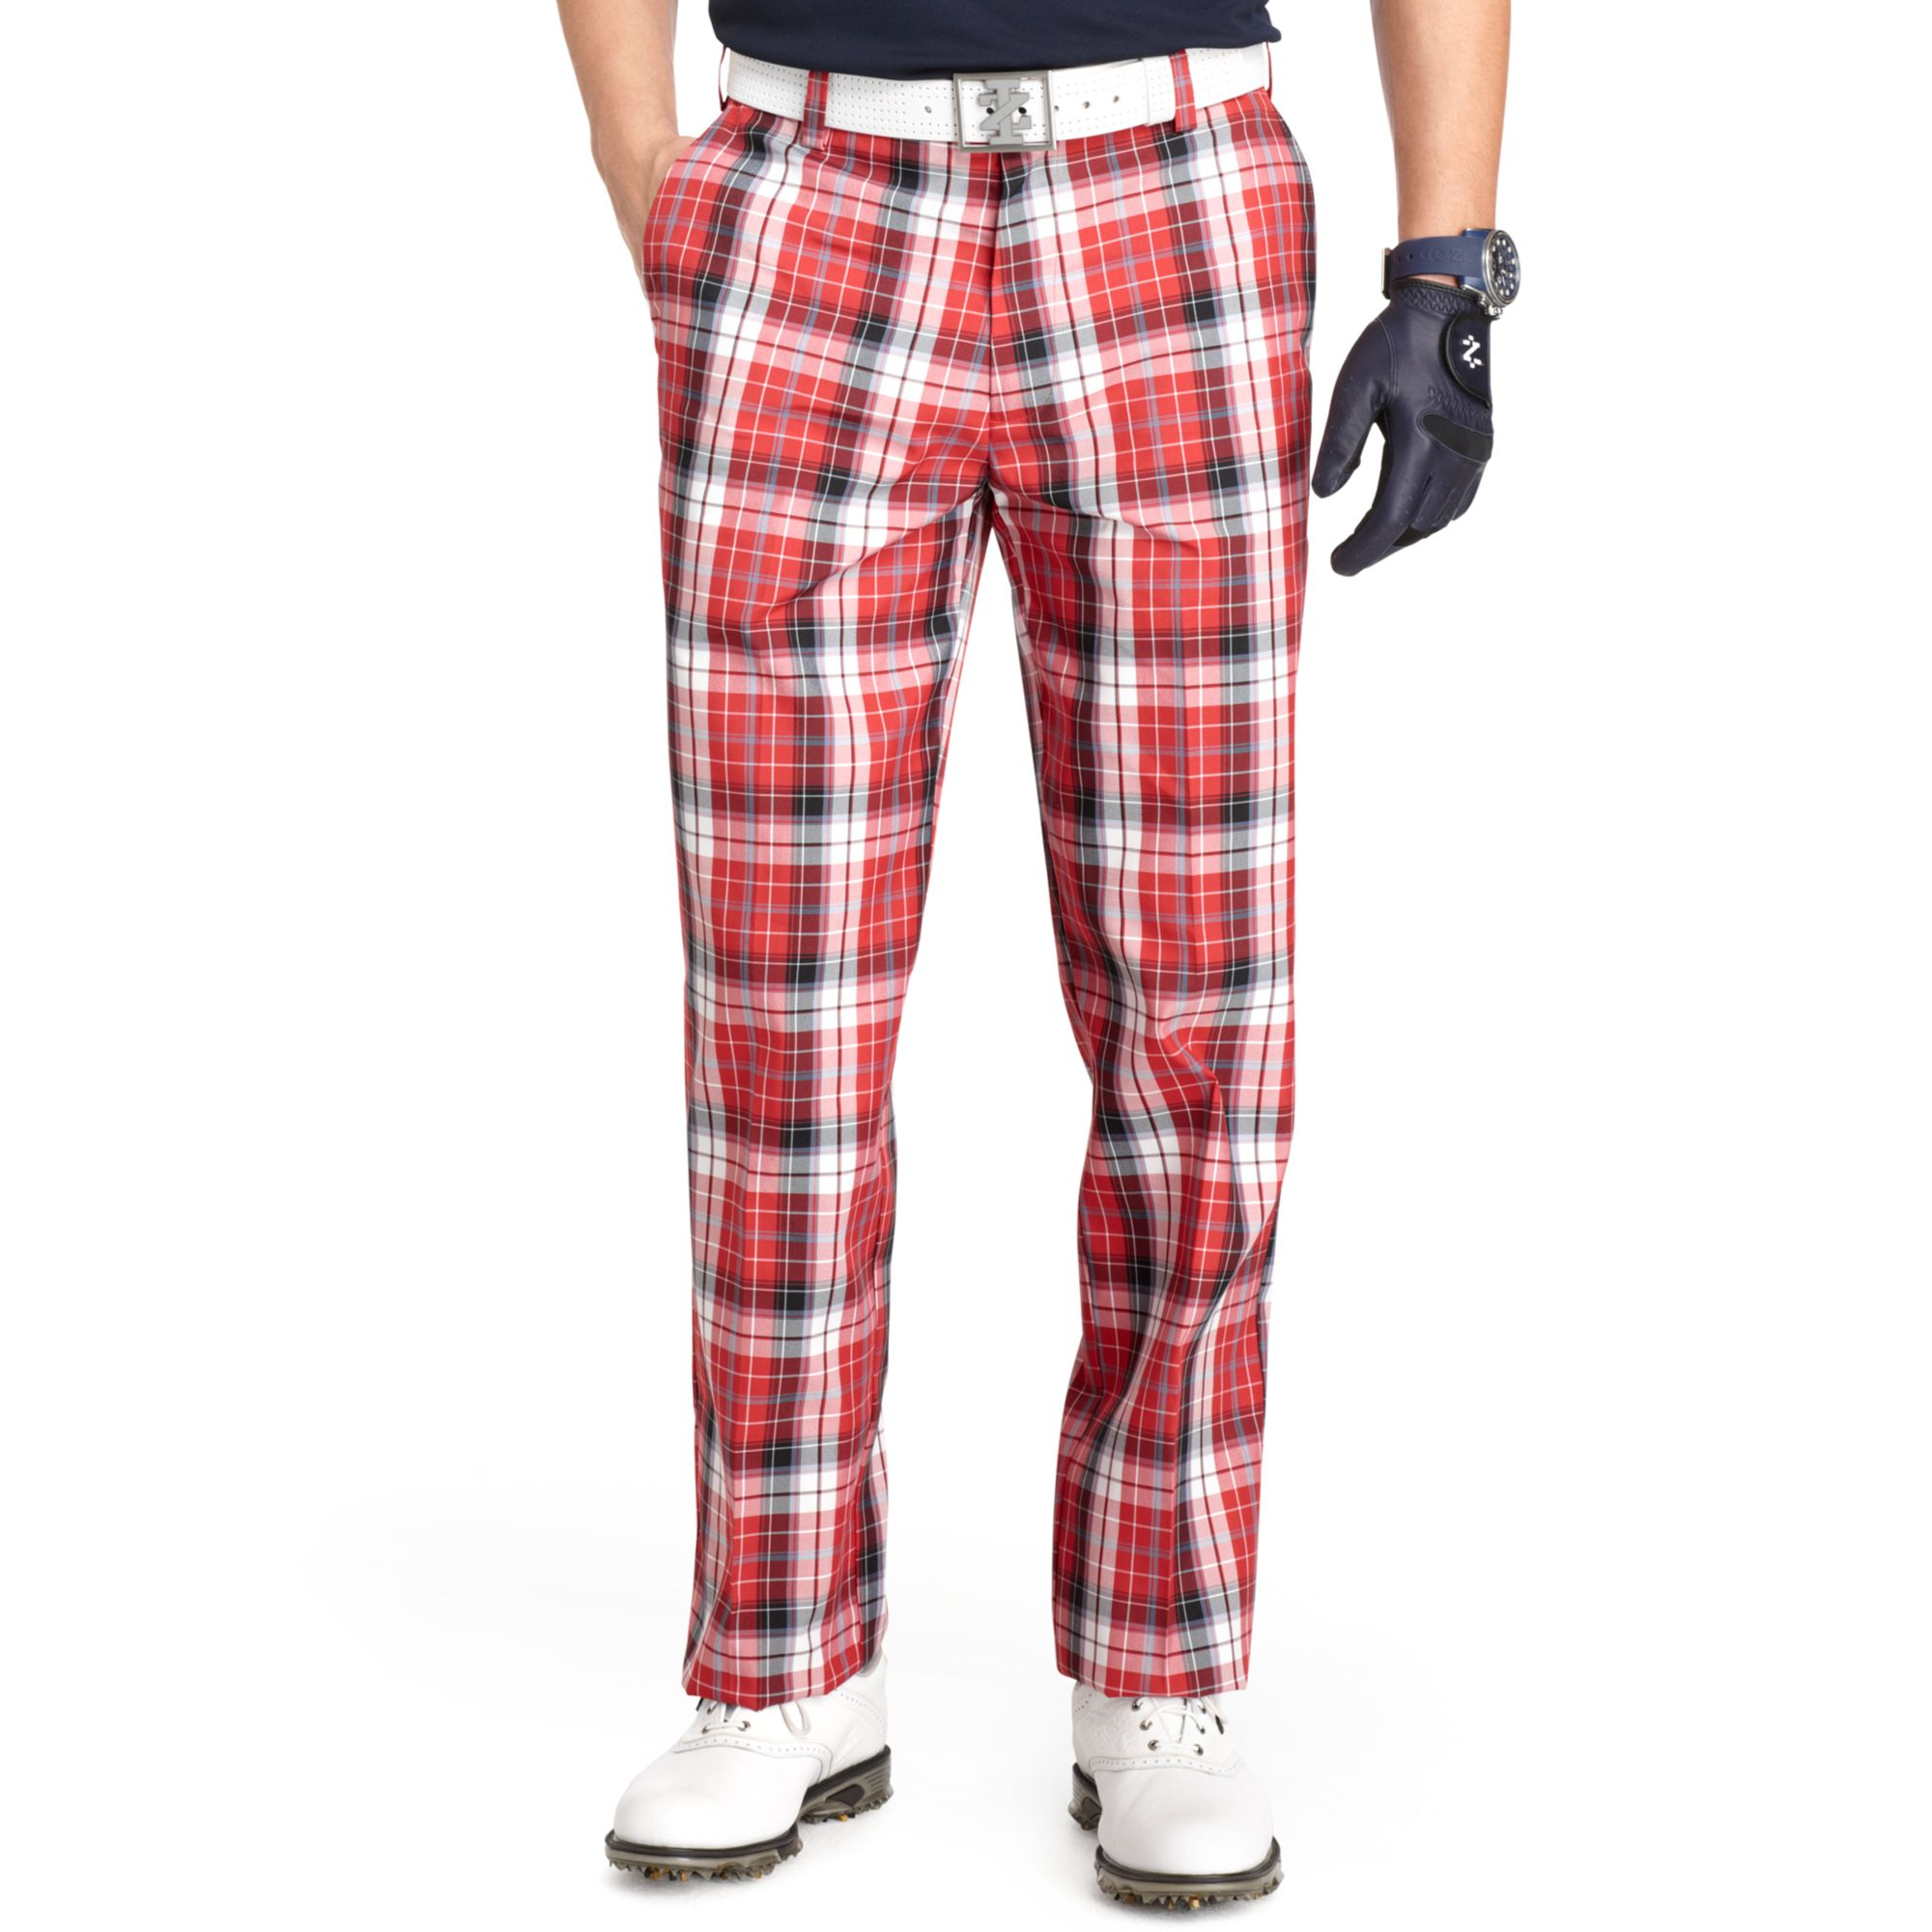 SU)Men's Fashion Stretch Dress Pants Slim Fit Plaid Pants Business Suit  Pants Casual Golf Pants – the best products in the Joom Geek online store